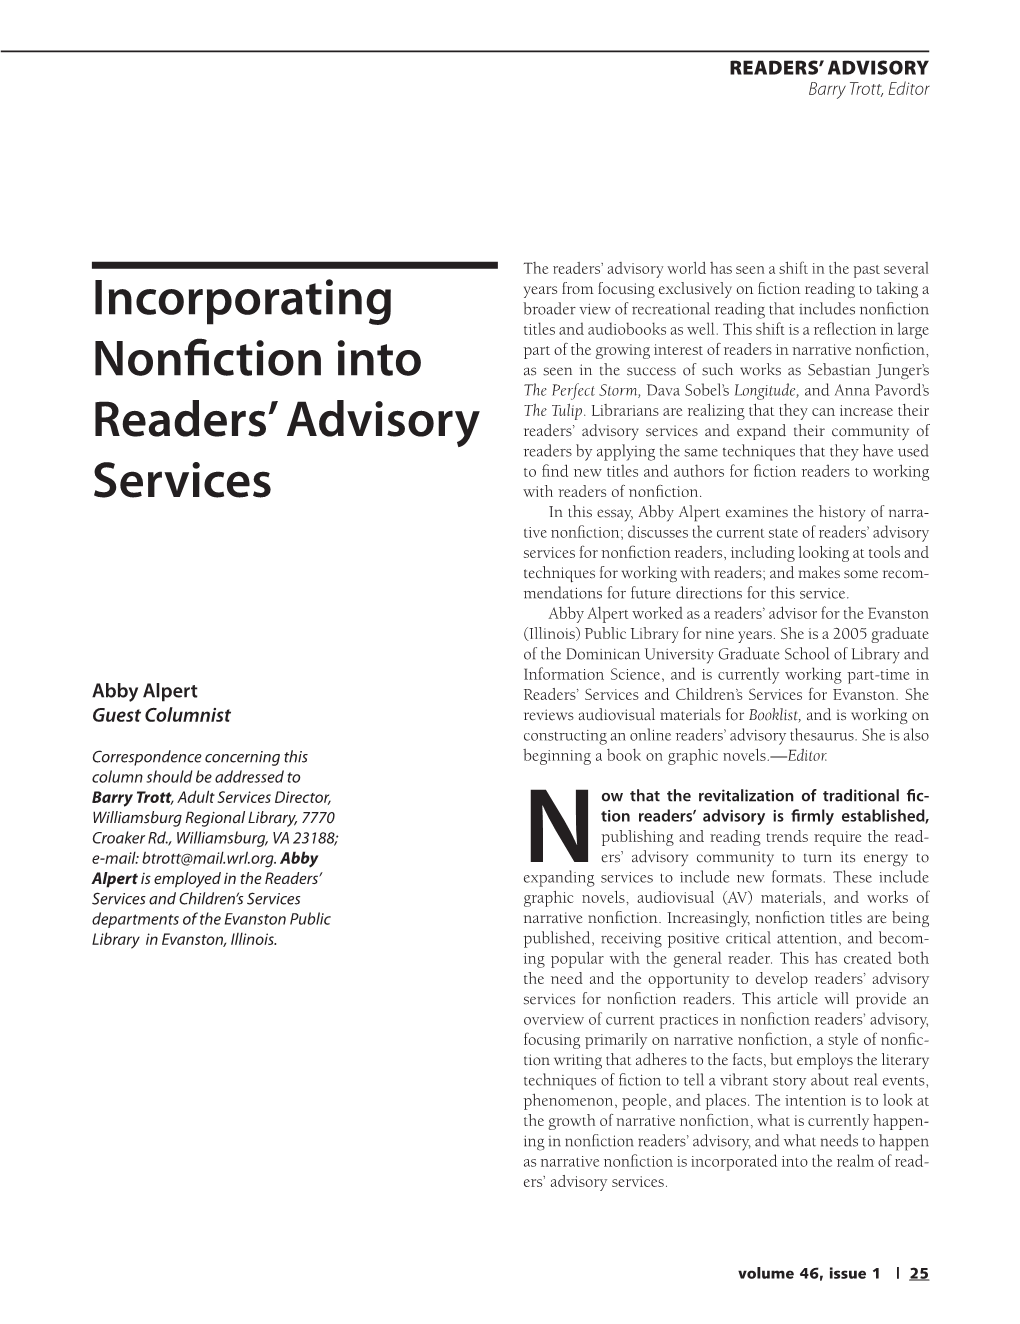 Incorporating Nonfiction Into Readers' Advisory Services